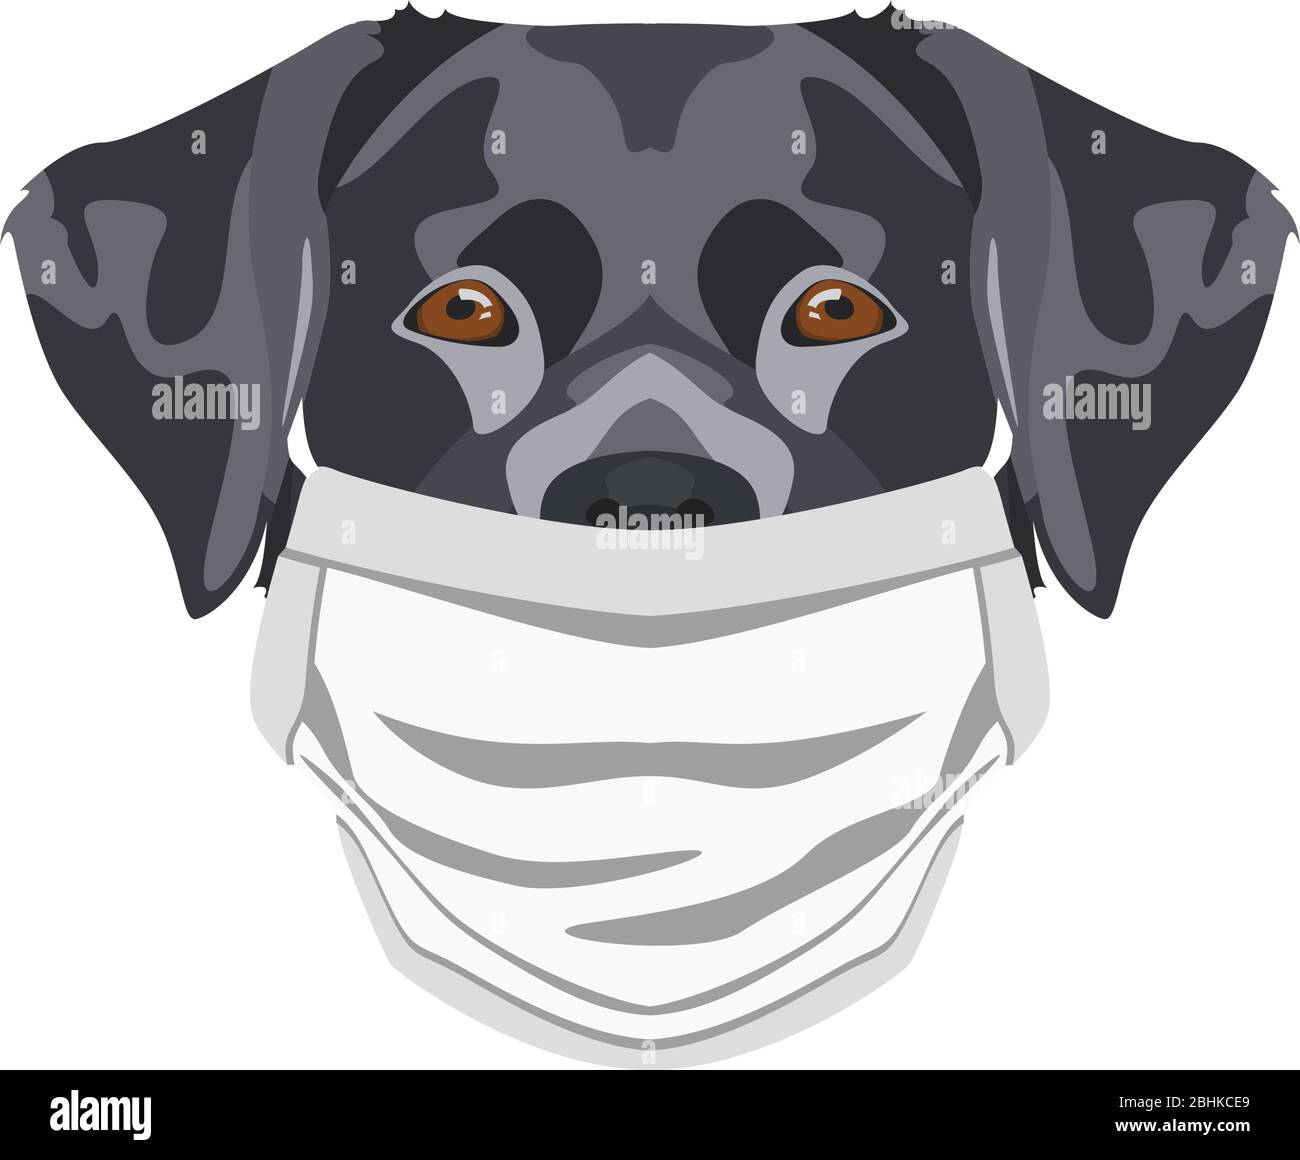 Illustration of a labrador with respirator. At this time of the pandemic, the design is a nice graphic for fans of dogs. Stock Vector